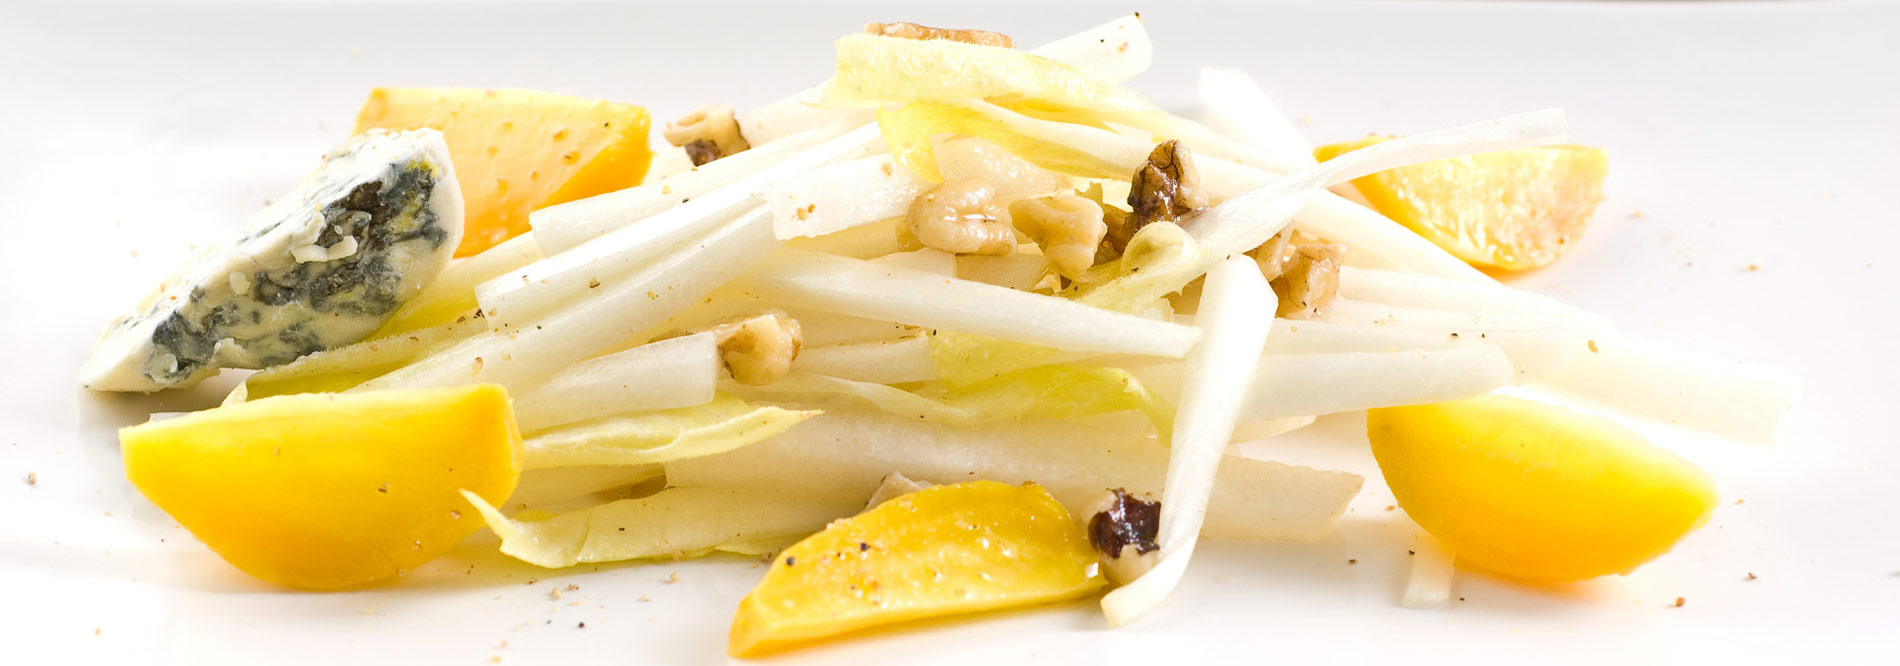 JI.071 Belgian endive with golden beets, Fourme d'Ambert bleu cheese and toasted walnuts